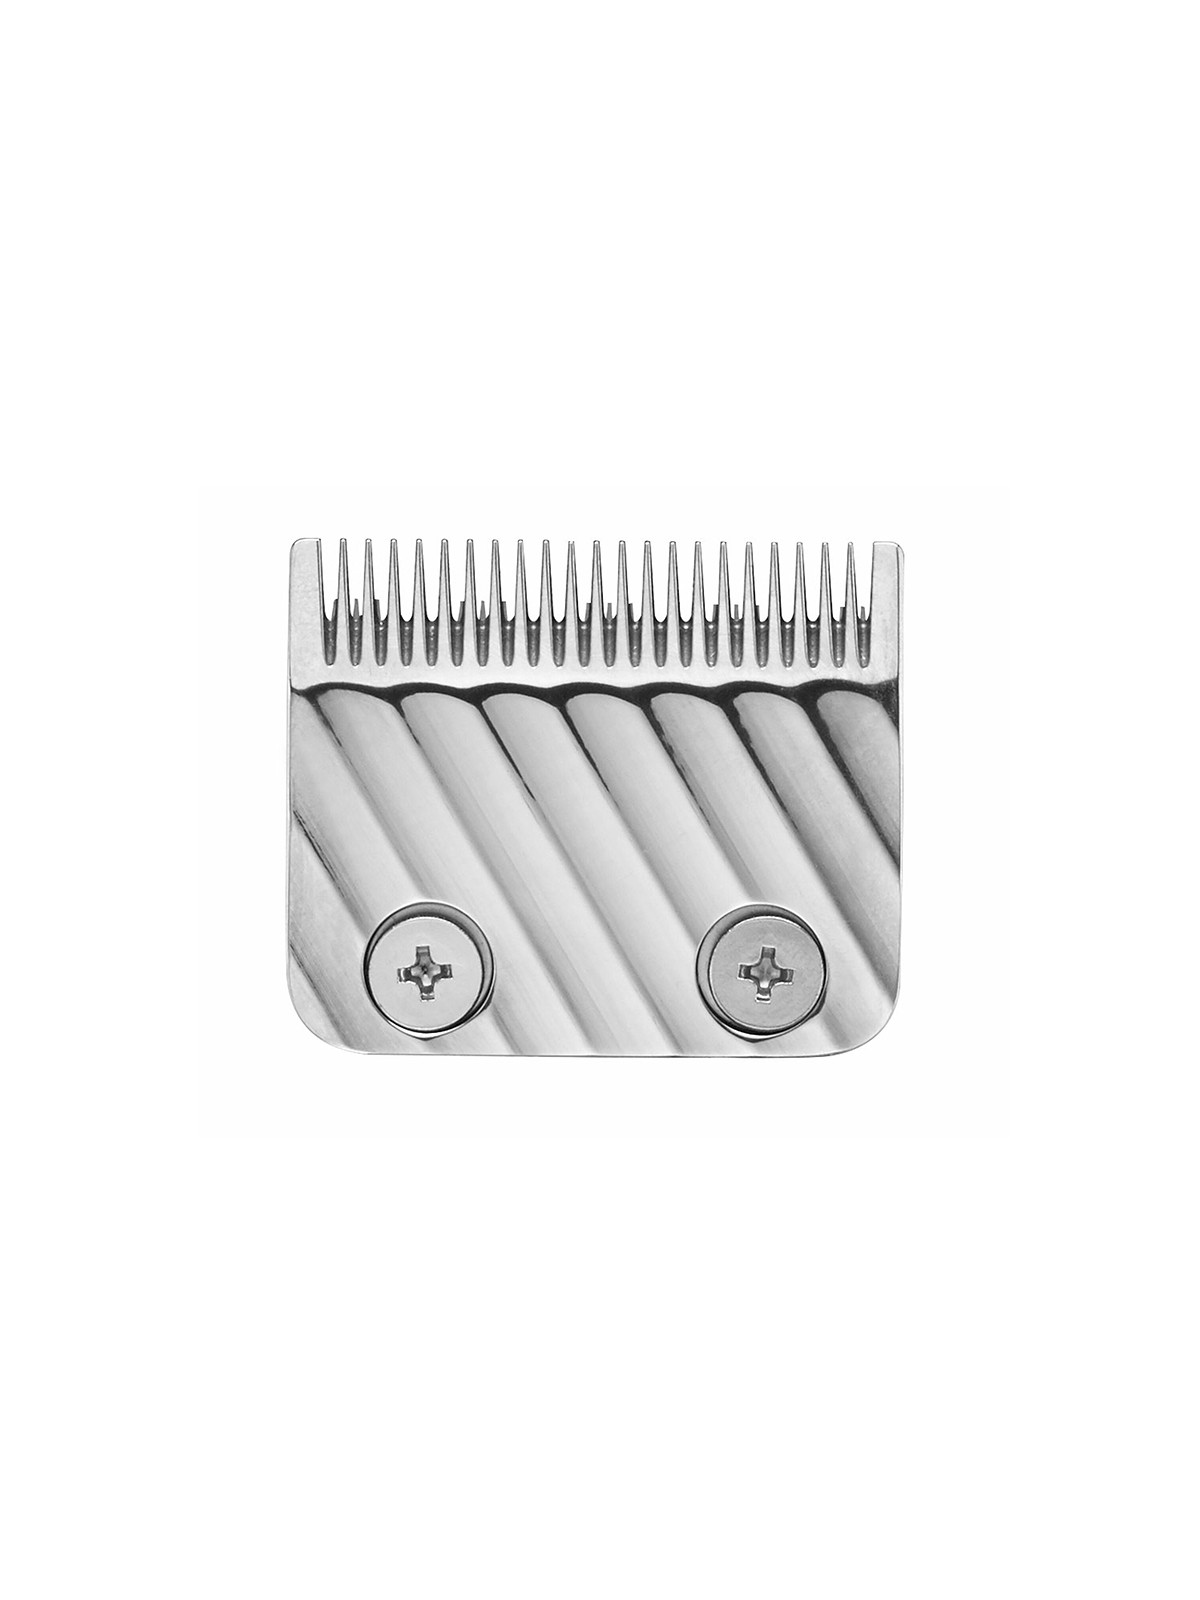 Babyliss PRO FX Clipper Wedge Blade